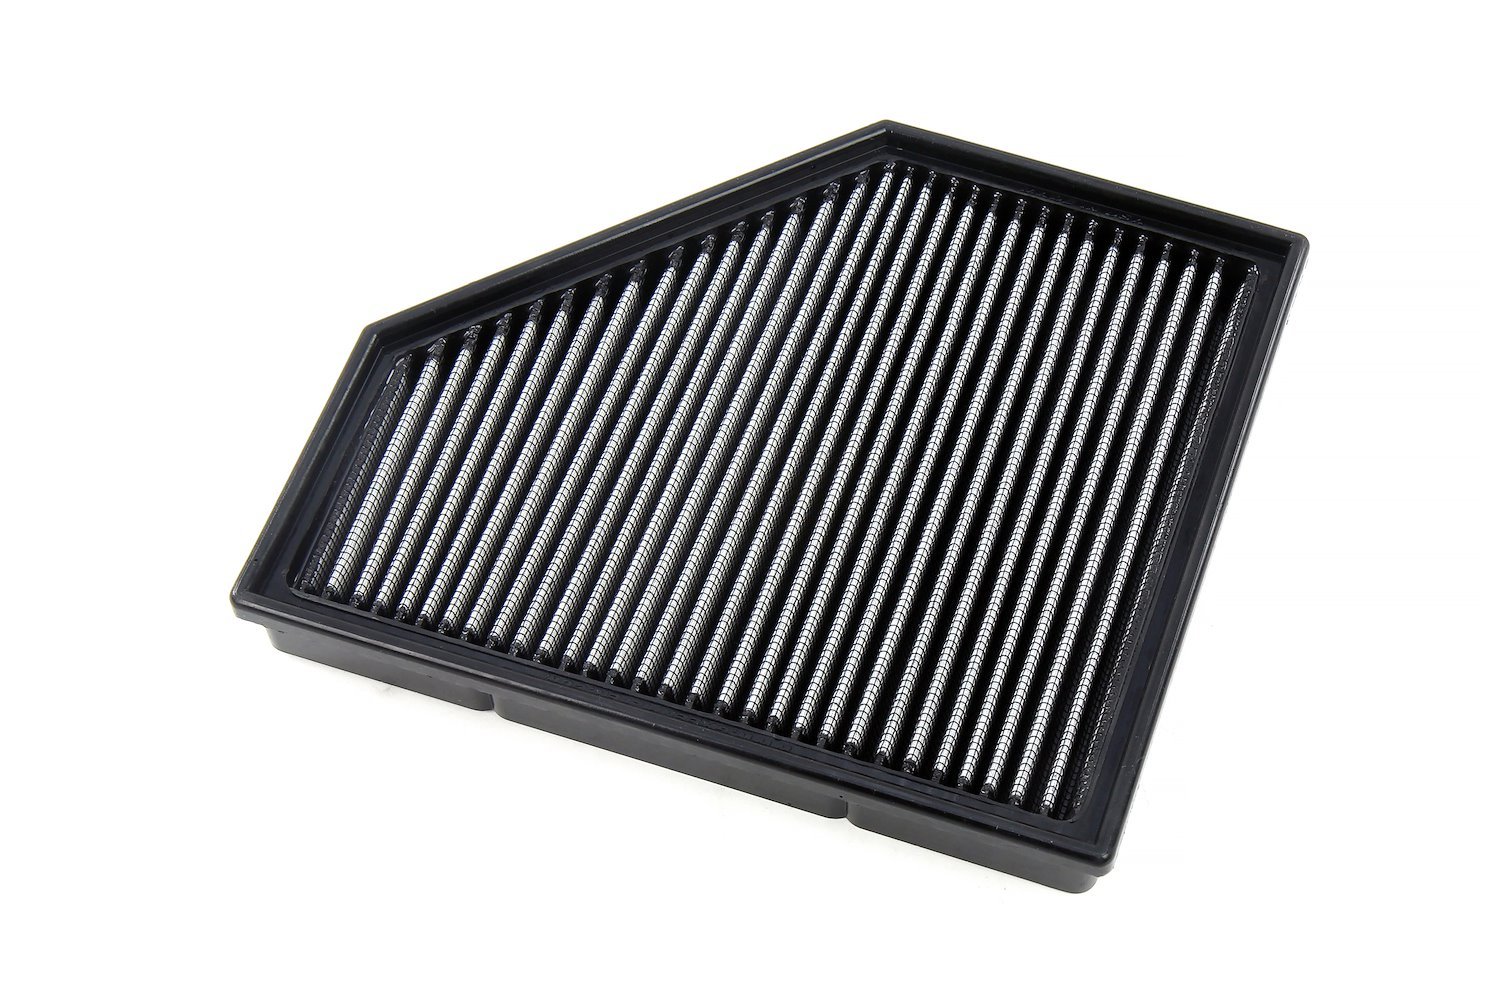 HPS-457371 Performance Drop-In Air Filter, Directly Replaces OEM Drop-In Panel Filter, Improves Performance & Fuel Economy